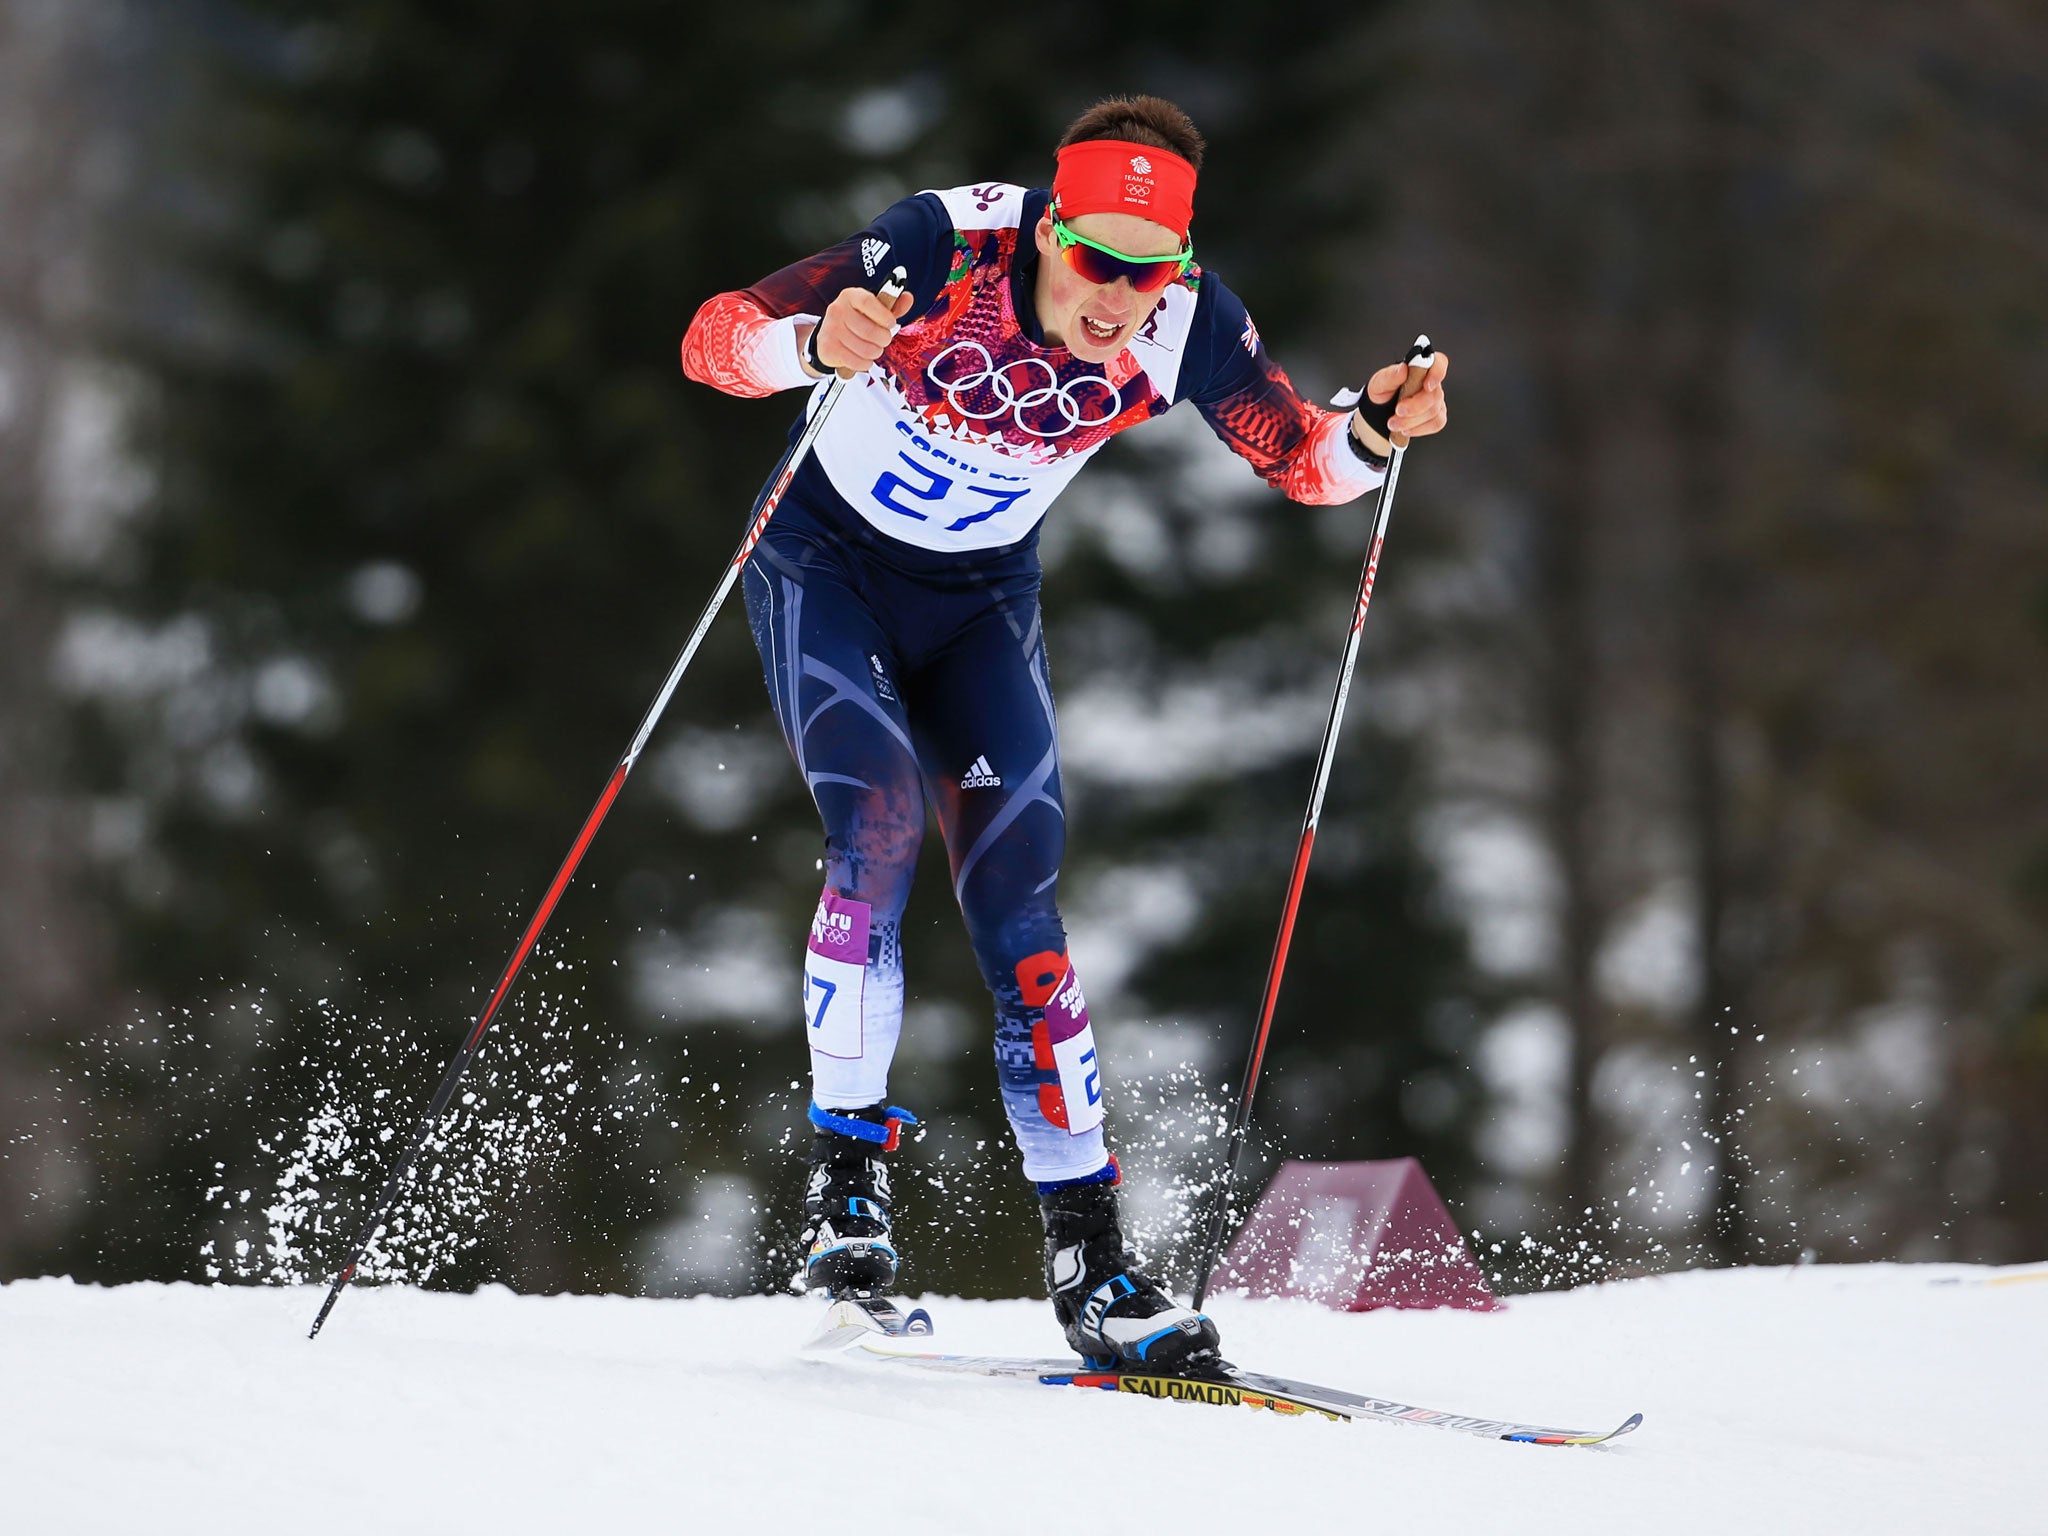 Andrew Musgrave qualified for the cross-country men's sprint quarter-finals